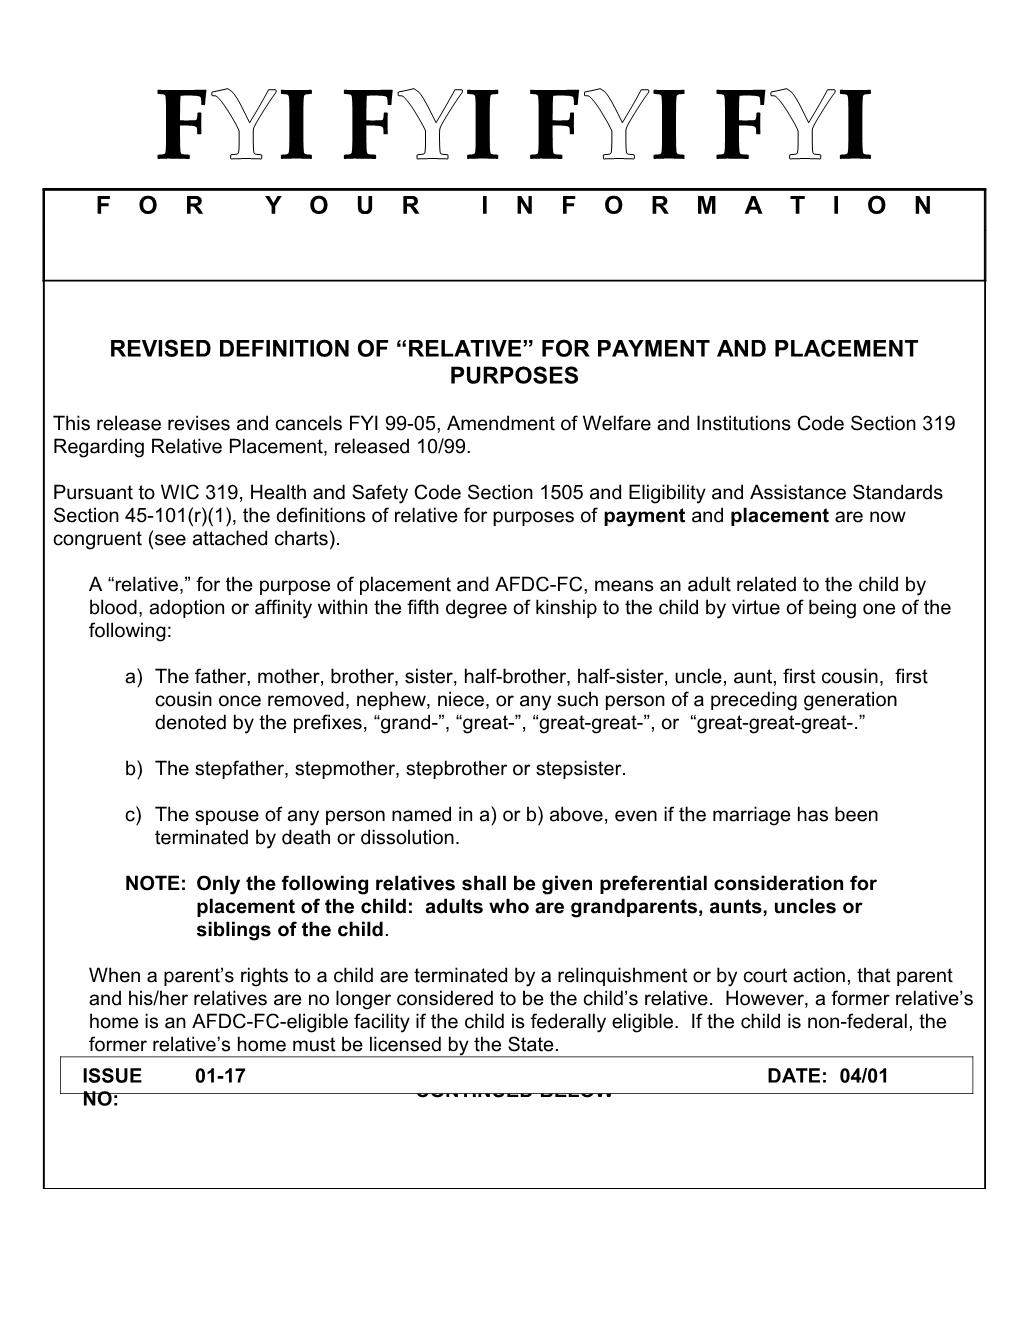 Revised Definition of Relative for Payment and Placement Purposes